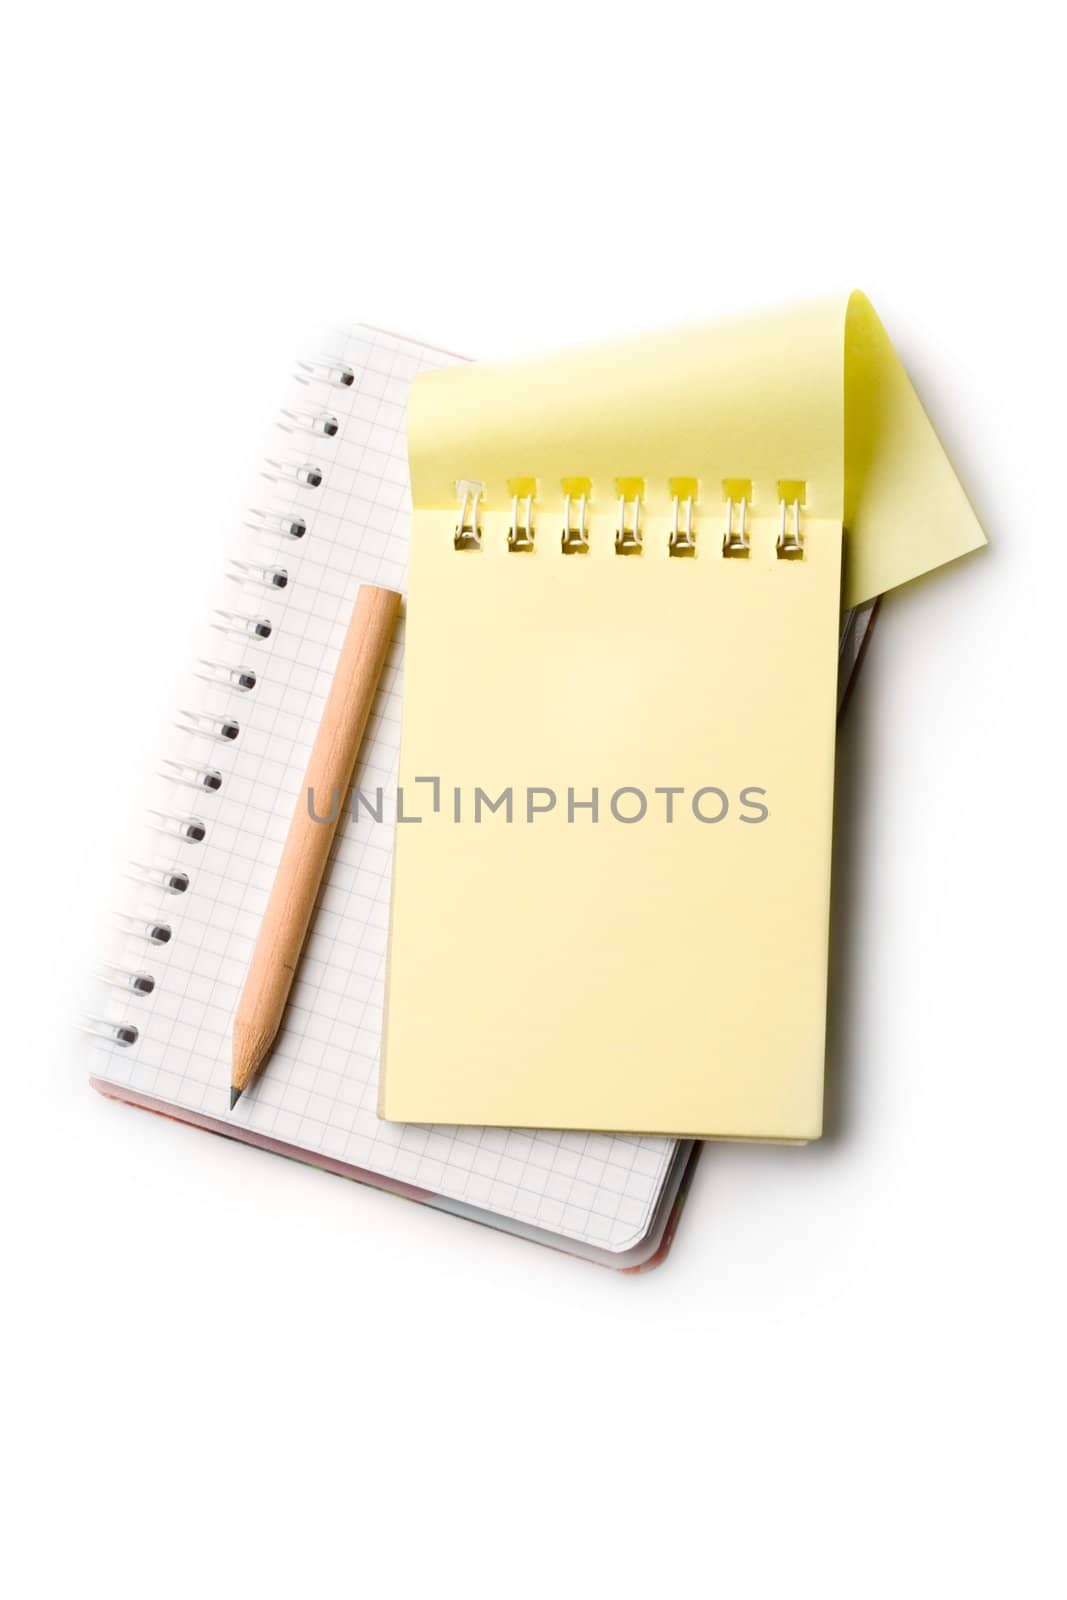 Notepad, pencil, isolated on white by Garsya